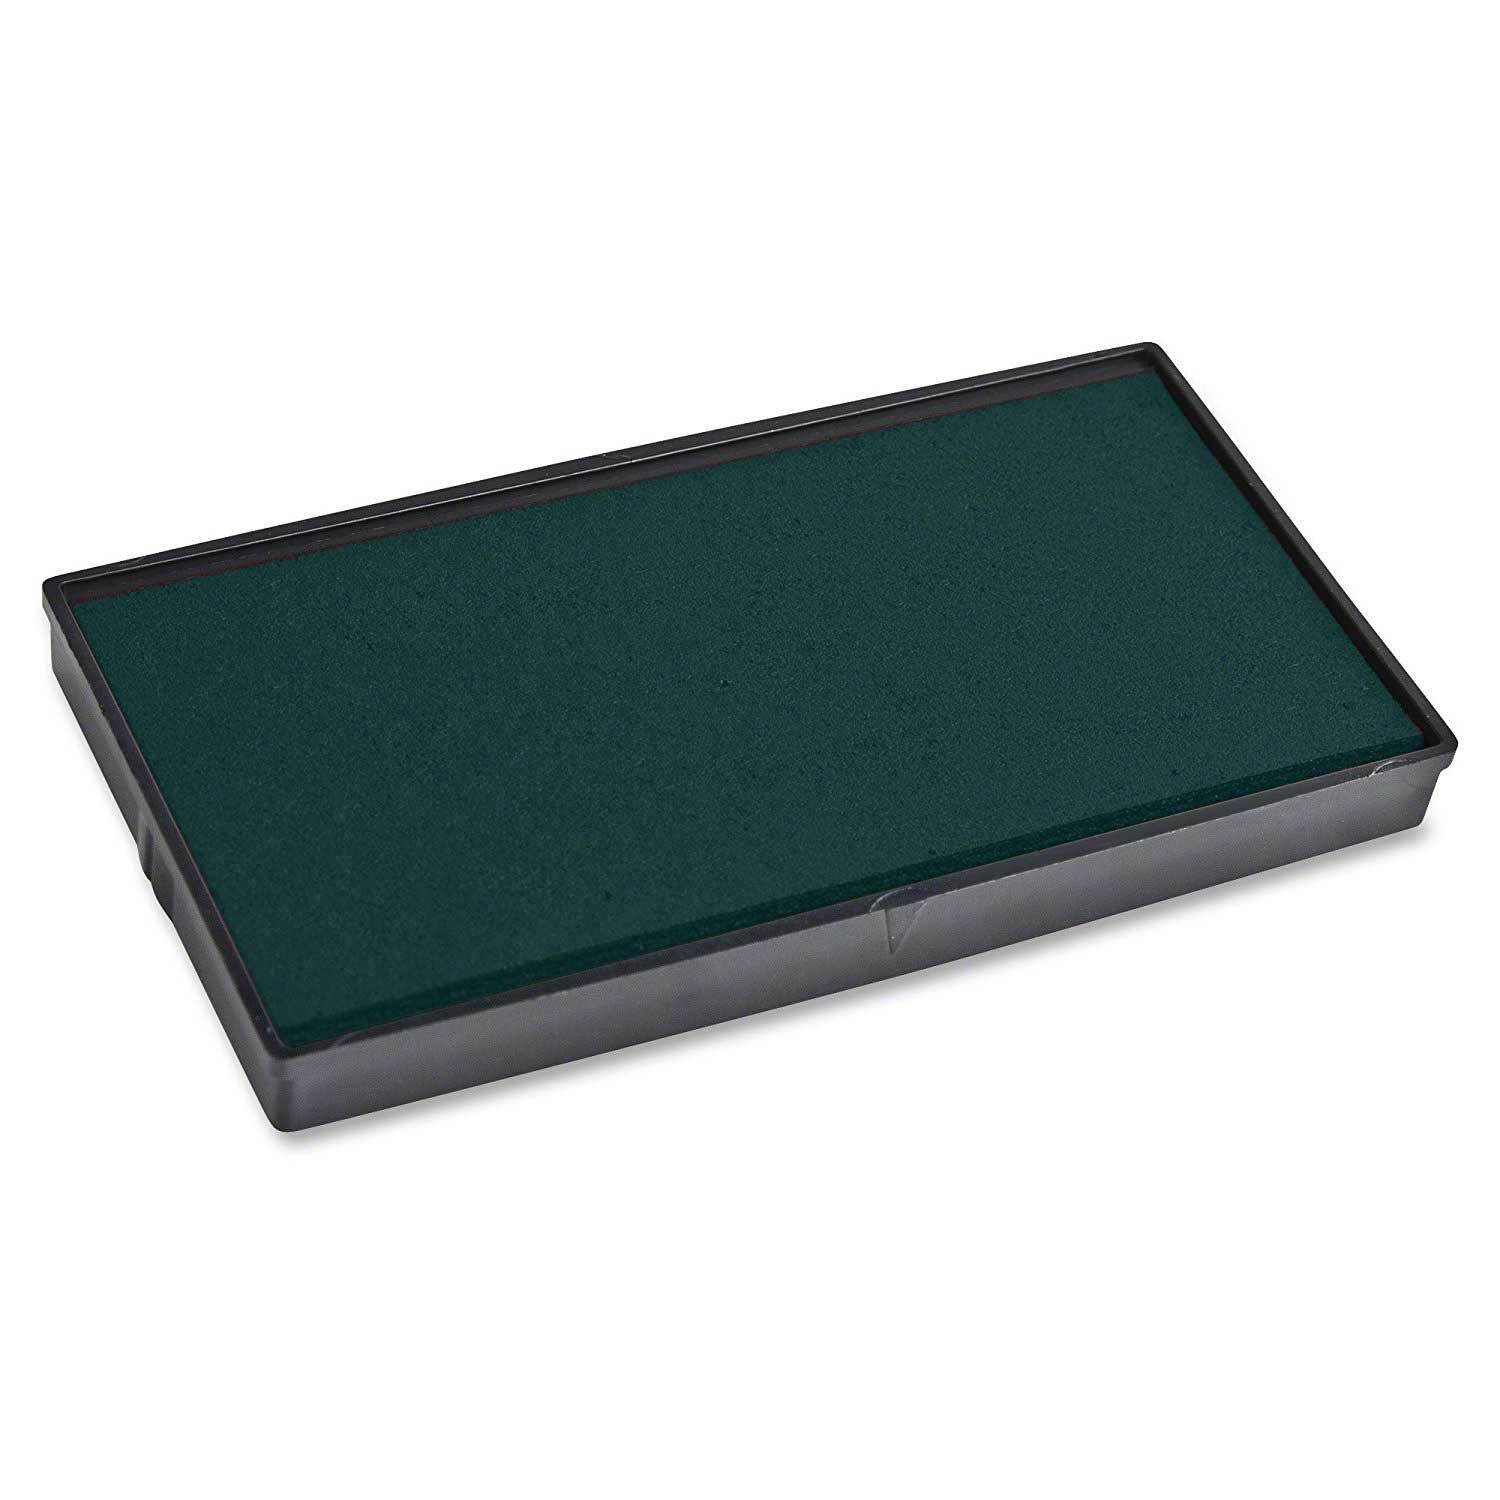 Replacement Pad for 2000 PLUS Printer 60 Self Inking Stamp - Green Ink Color